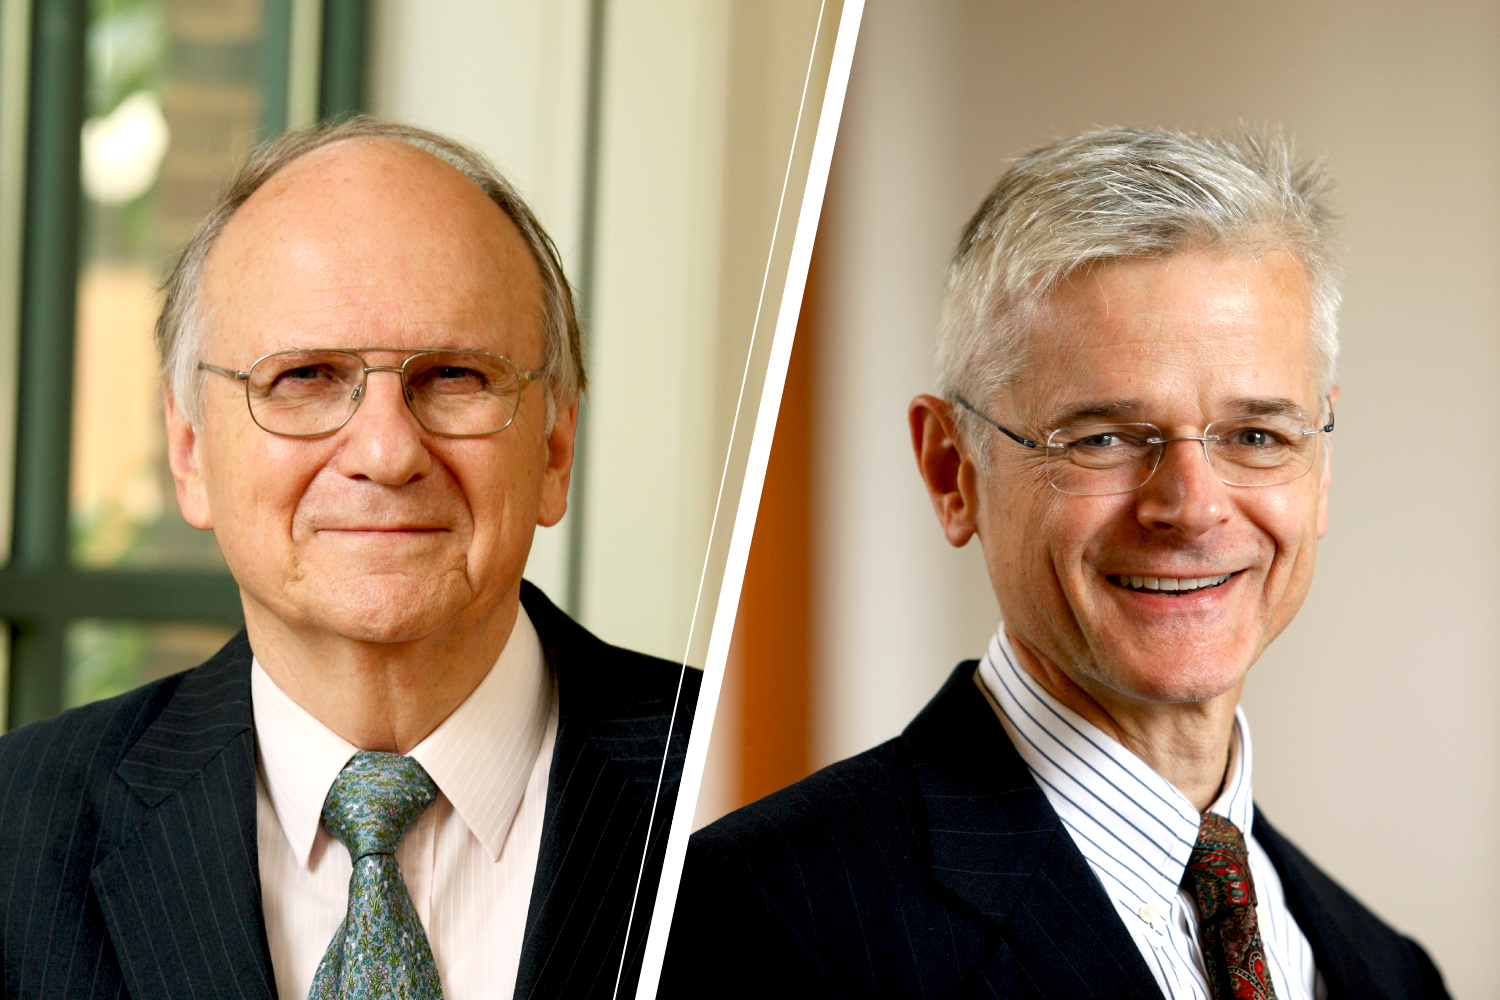 UVA’s A.E. Dick Howard, left, and Daniel Ortiz are among four law professors who filed an amicus brief supporting the governor’s right to “remove political disability by group.”